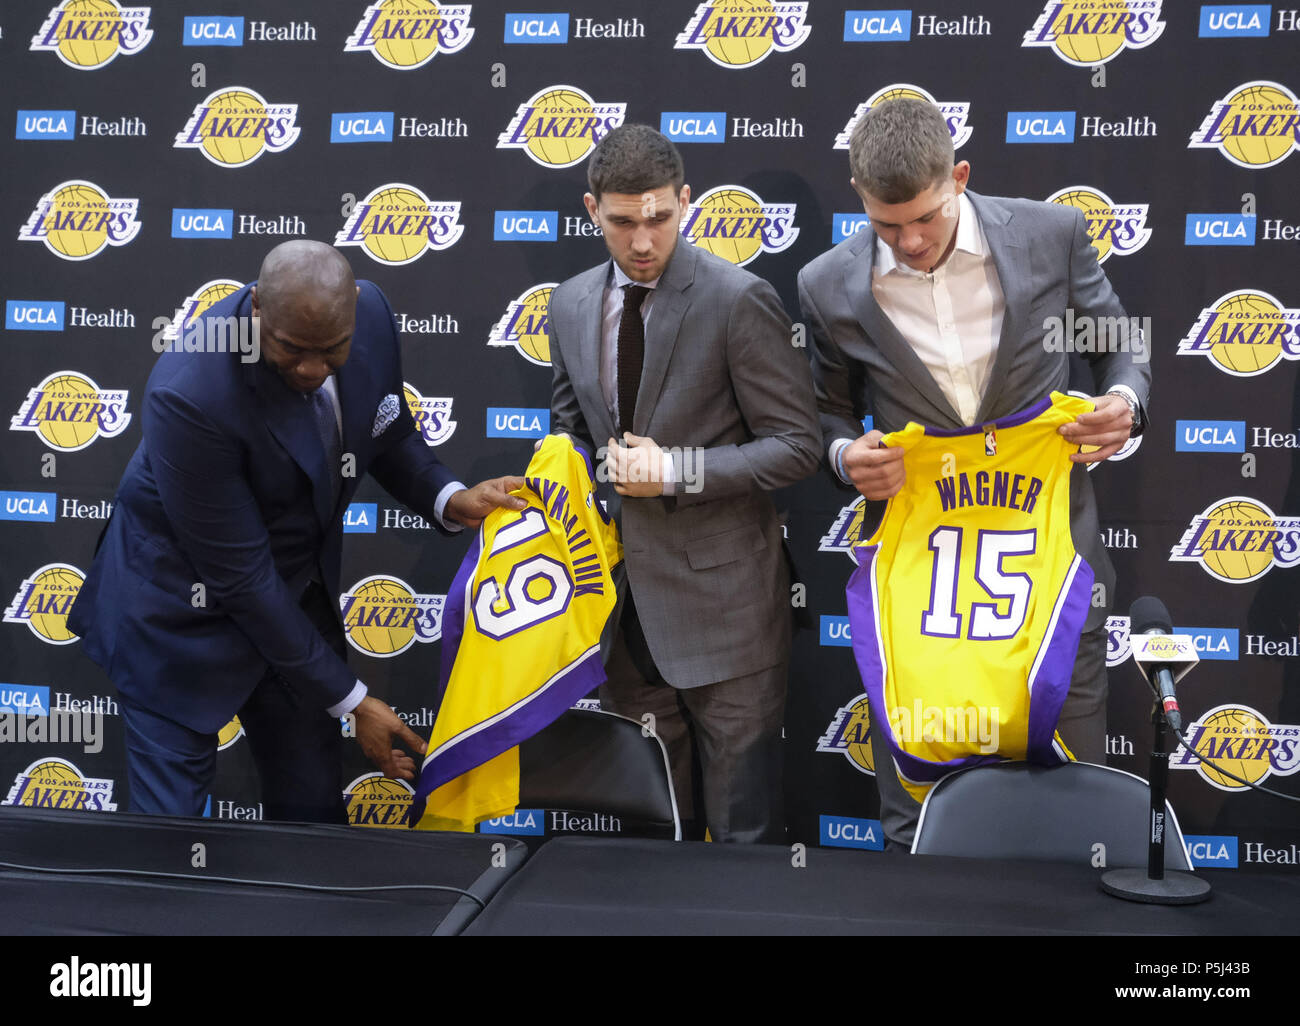 Los Angeles, California, USA. 26th June, 2018. Los Angeles Lakers president of basketball operations, Earvin ''Magic'' Johnson, left, rookies Sviatoslav Mykhailiuk, center, and Moritz Wagner pose with their new jerseys at an introductory press conference in Los Angeles, Tuesday, June 26, 2018. The Lakers introduce two new draft players, Moritz Wagner, originally from Germany, the 25th pick in the 2018 NBA Draft and guard Sviatoslav Mykhailiuk, originally from Ukraine. Credit: Ringo Chiu/ZUMA Wire/Alamy Live News Stock Photo